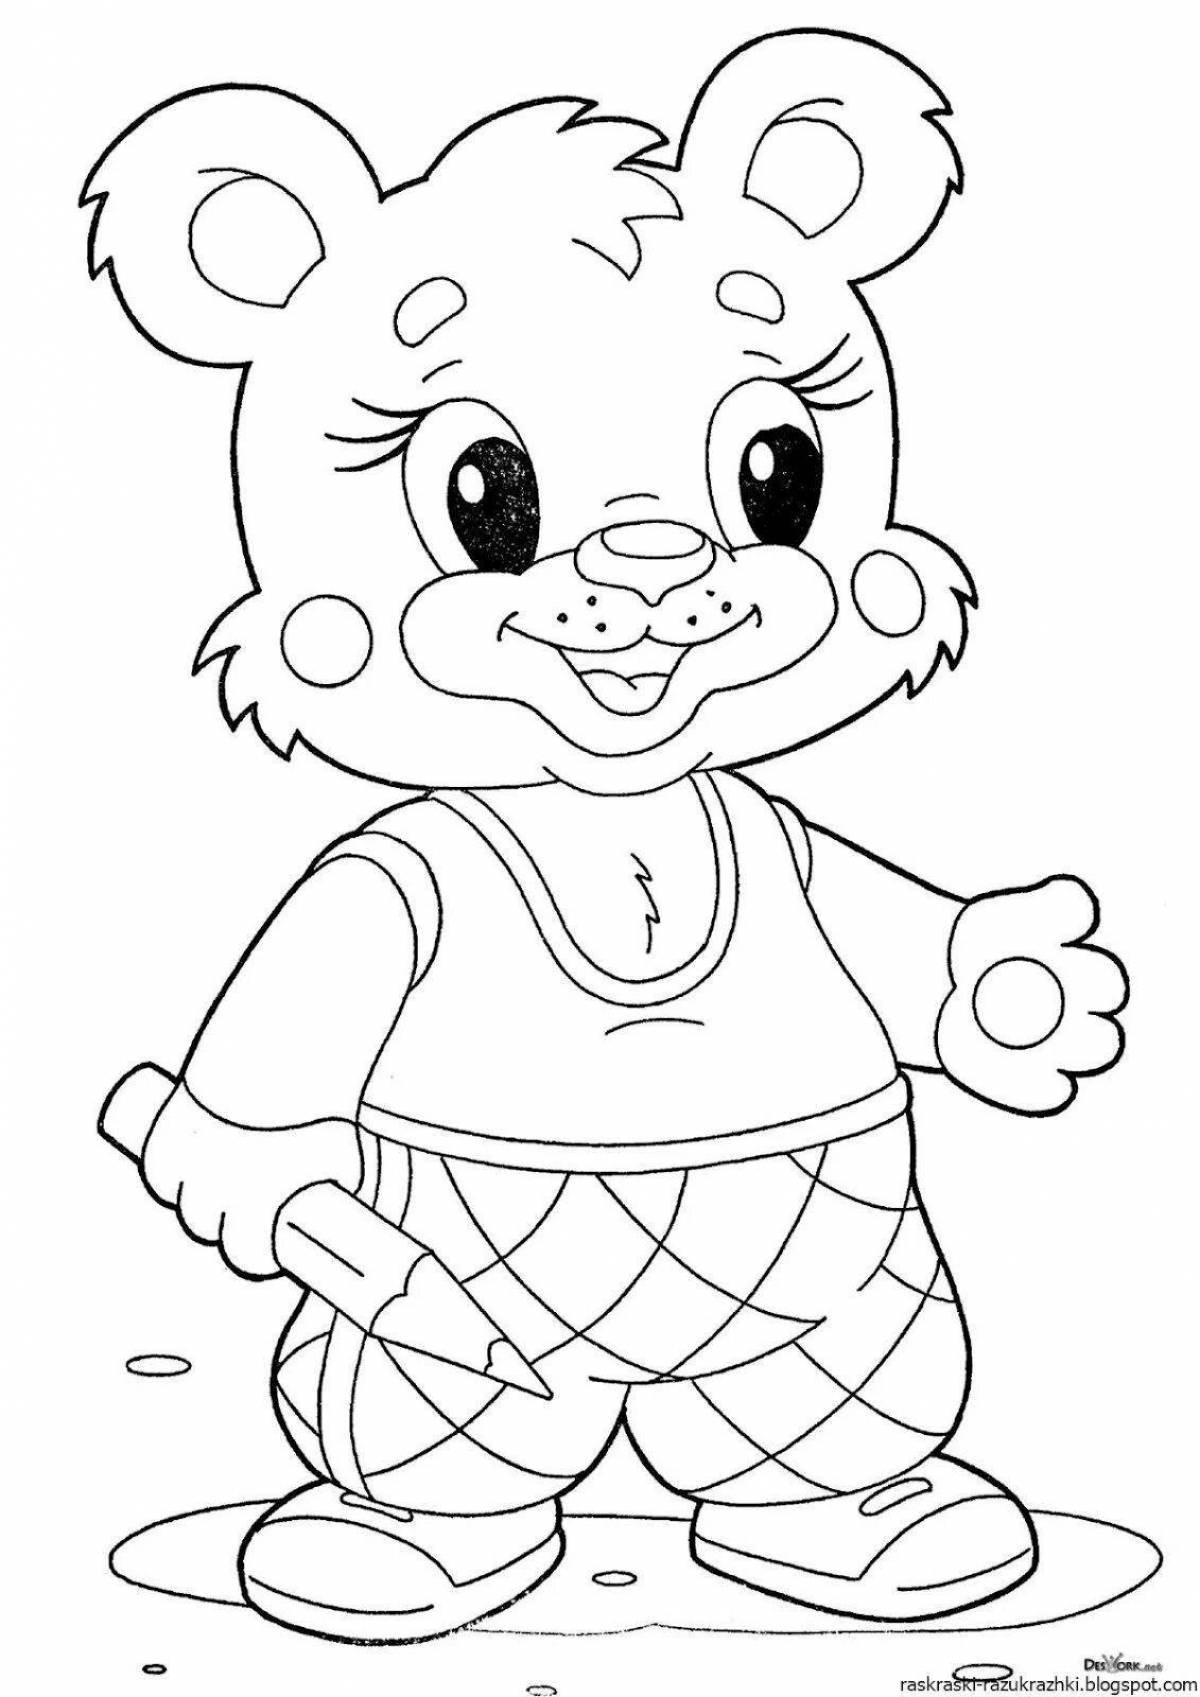 Furry animals coloring pages for kids